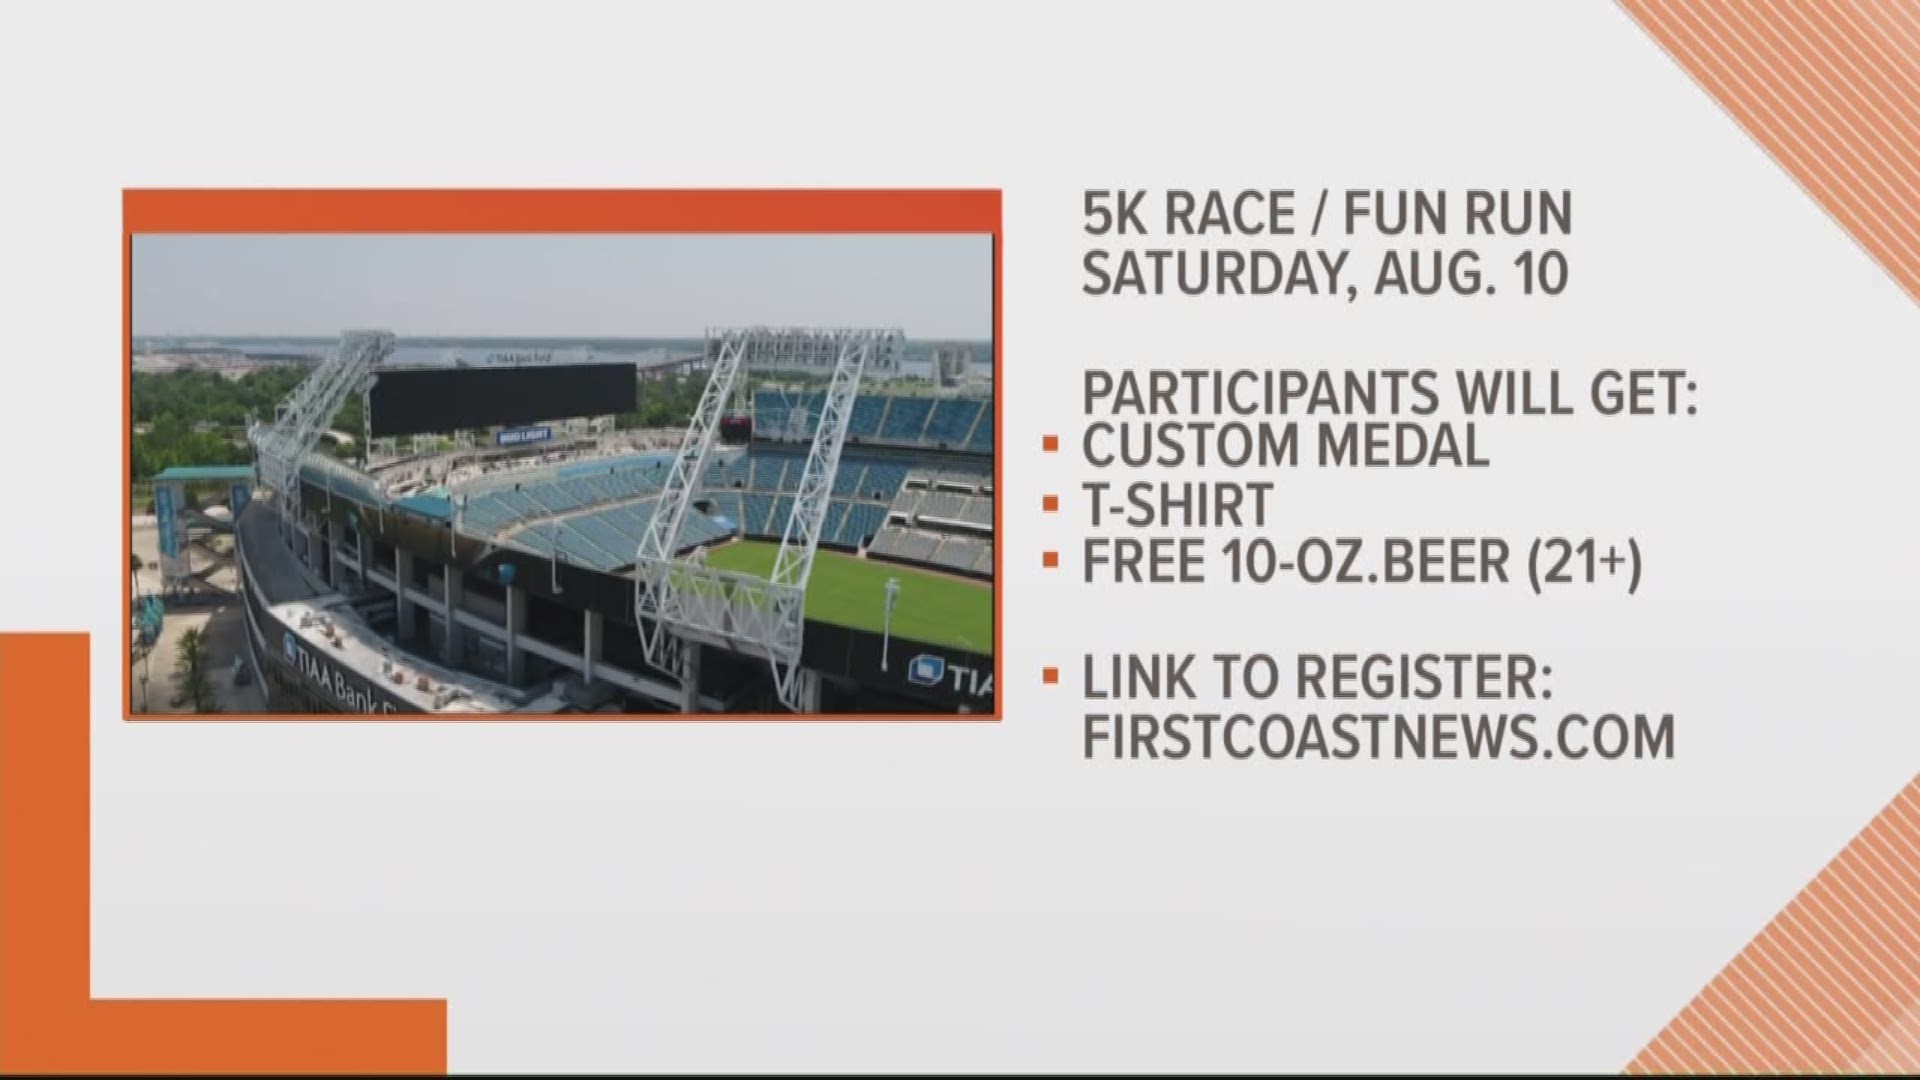 The race takes place at the TIAA Bank Field on Aug. 10.